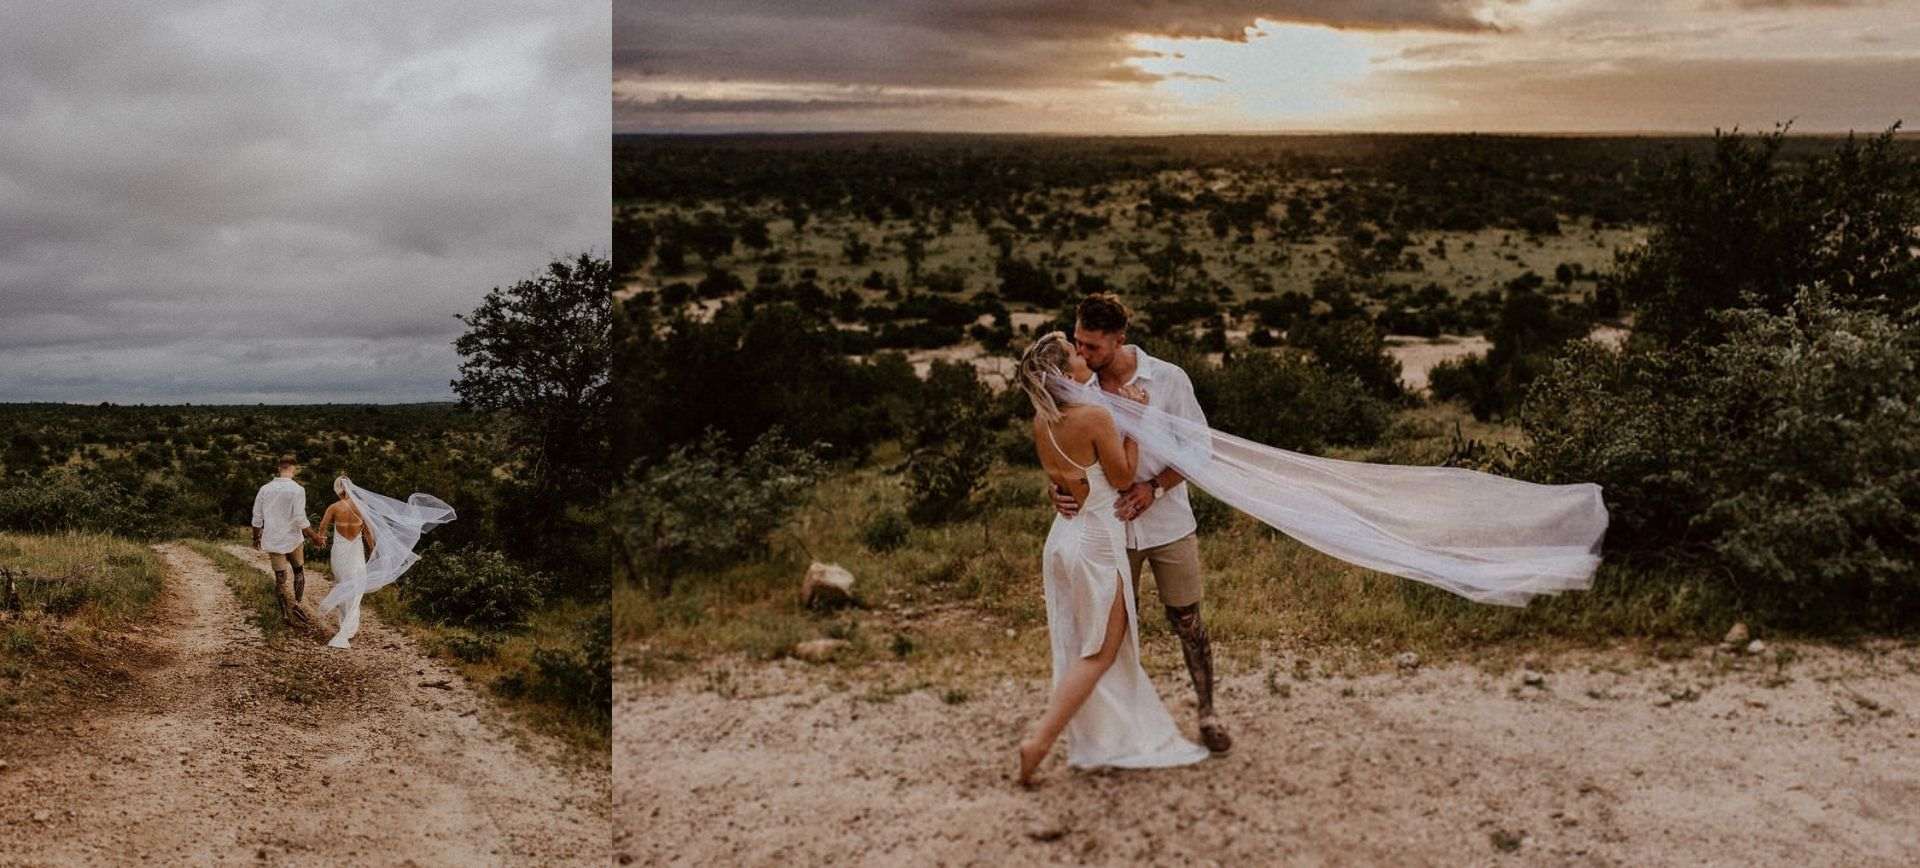 South Africa Safari elopement wedding - bride and groom at sunset